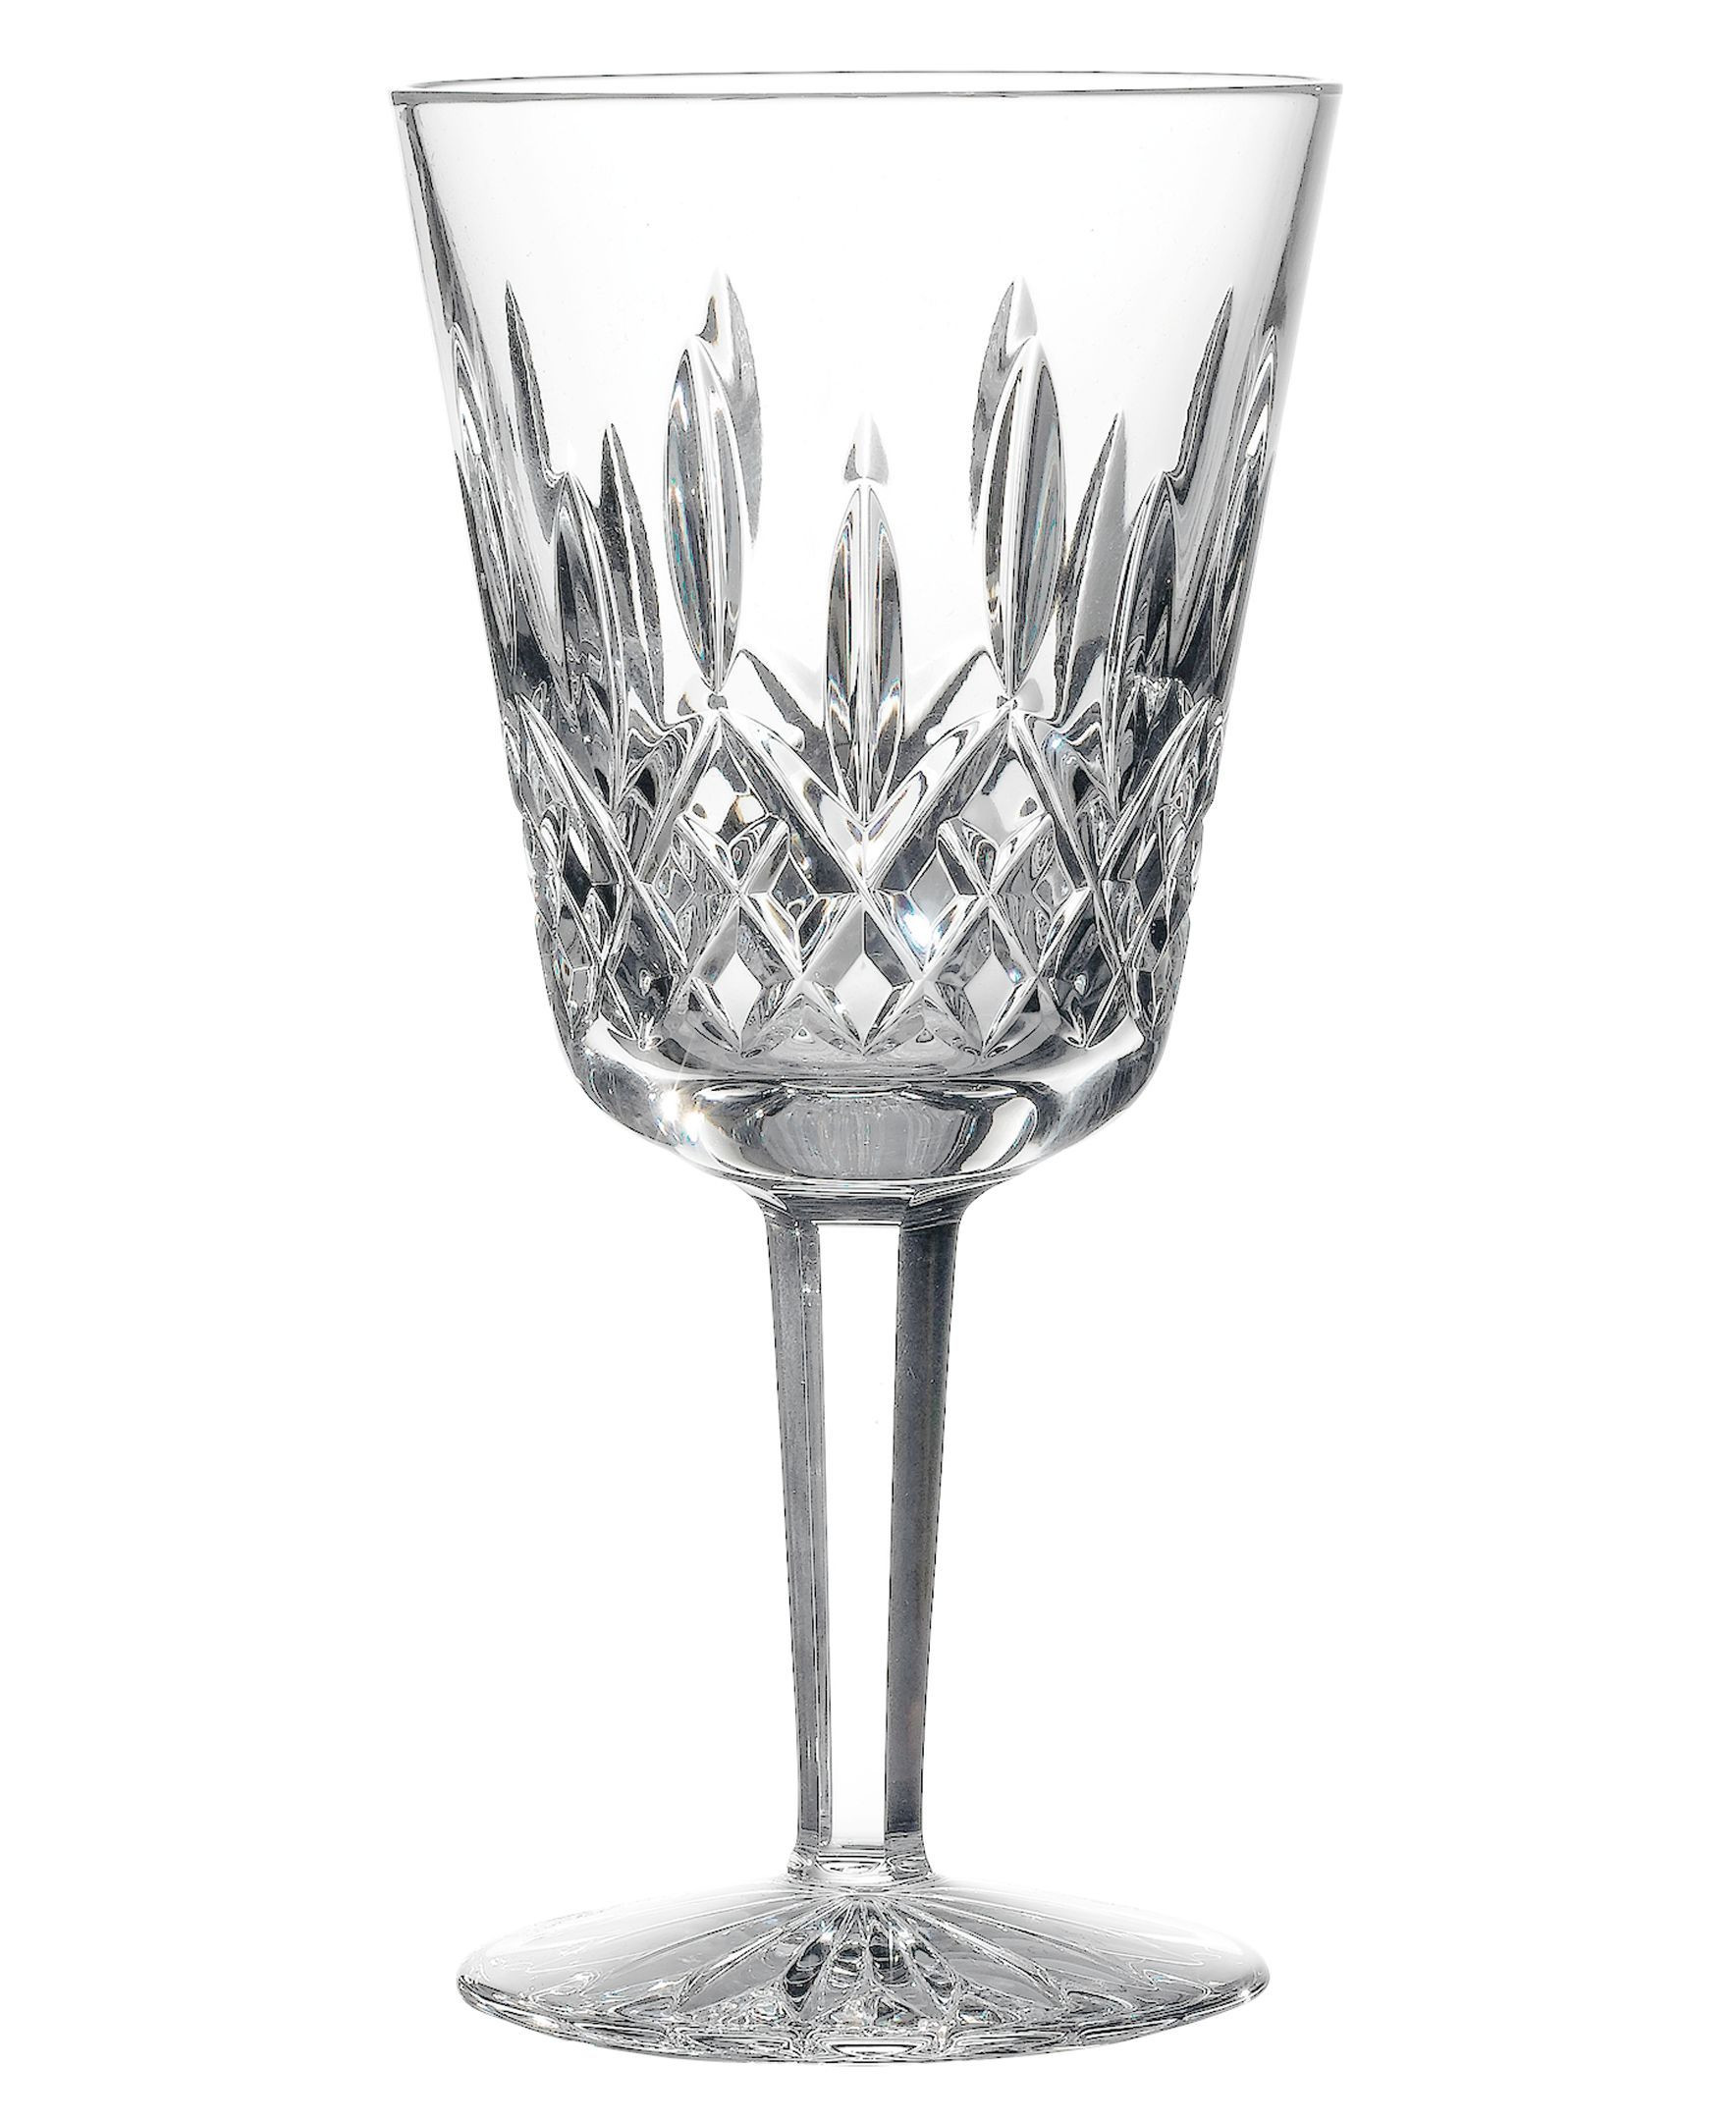 29 Cute Waterford Vase Patterns 2024 free download waterford vase patterns of waterford stemware lismore tall goblet drinkware and products in waterford stemware lismore tall goblet